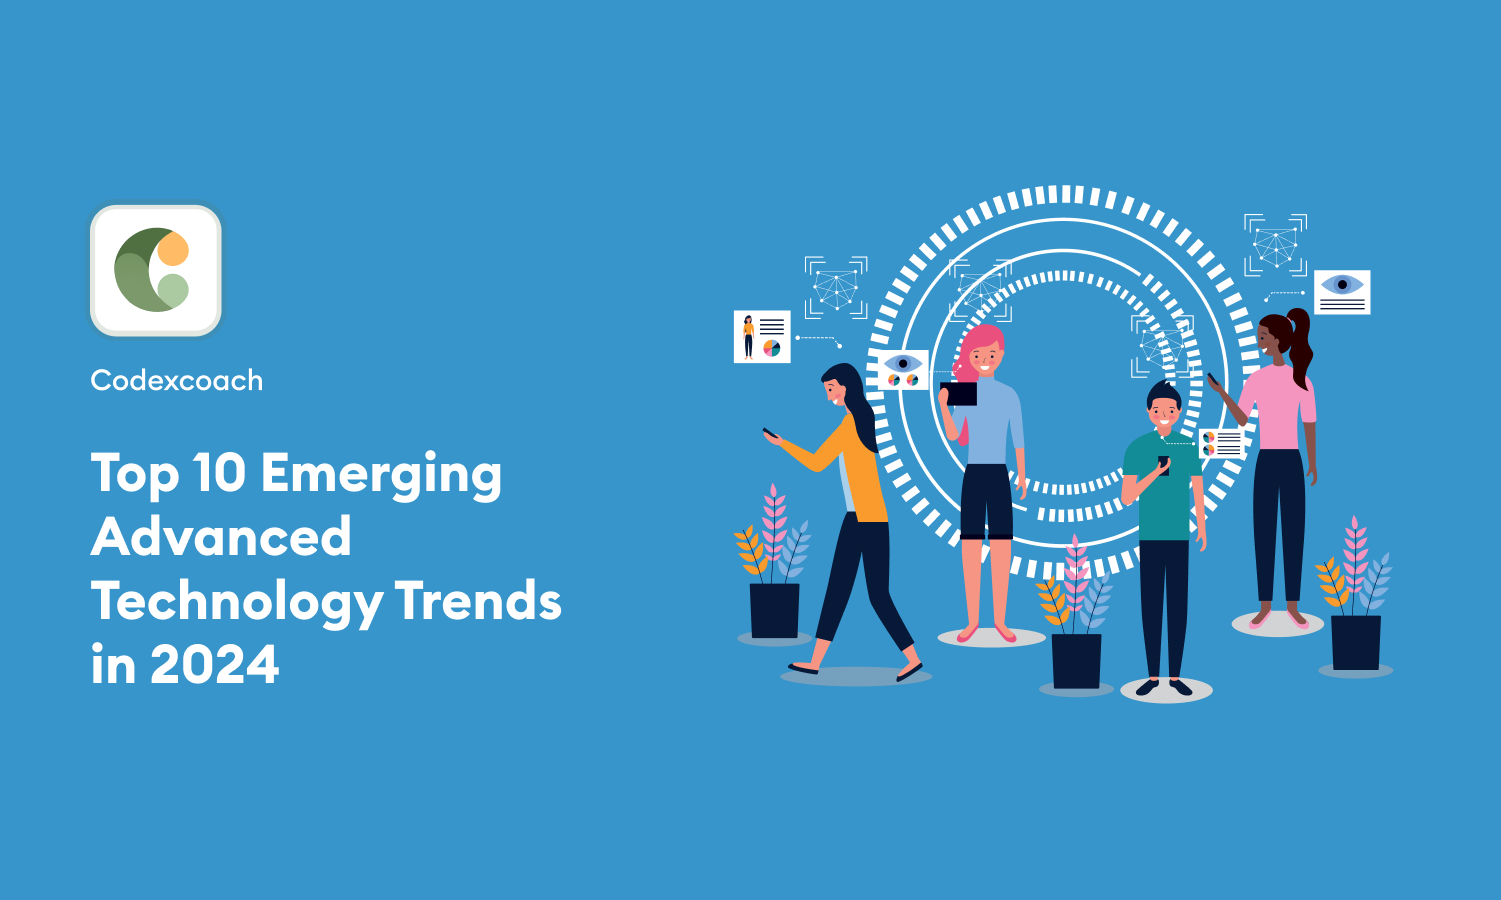 Top 10 Emerging Advanced Technology Trends in 2024